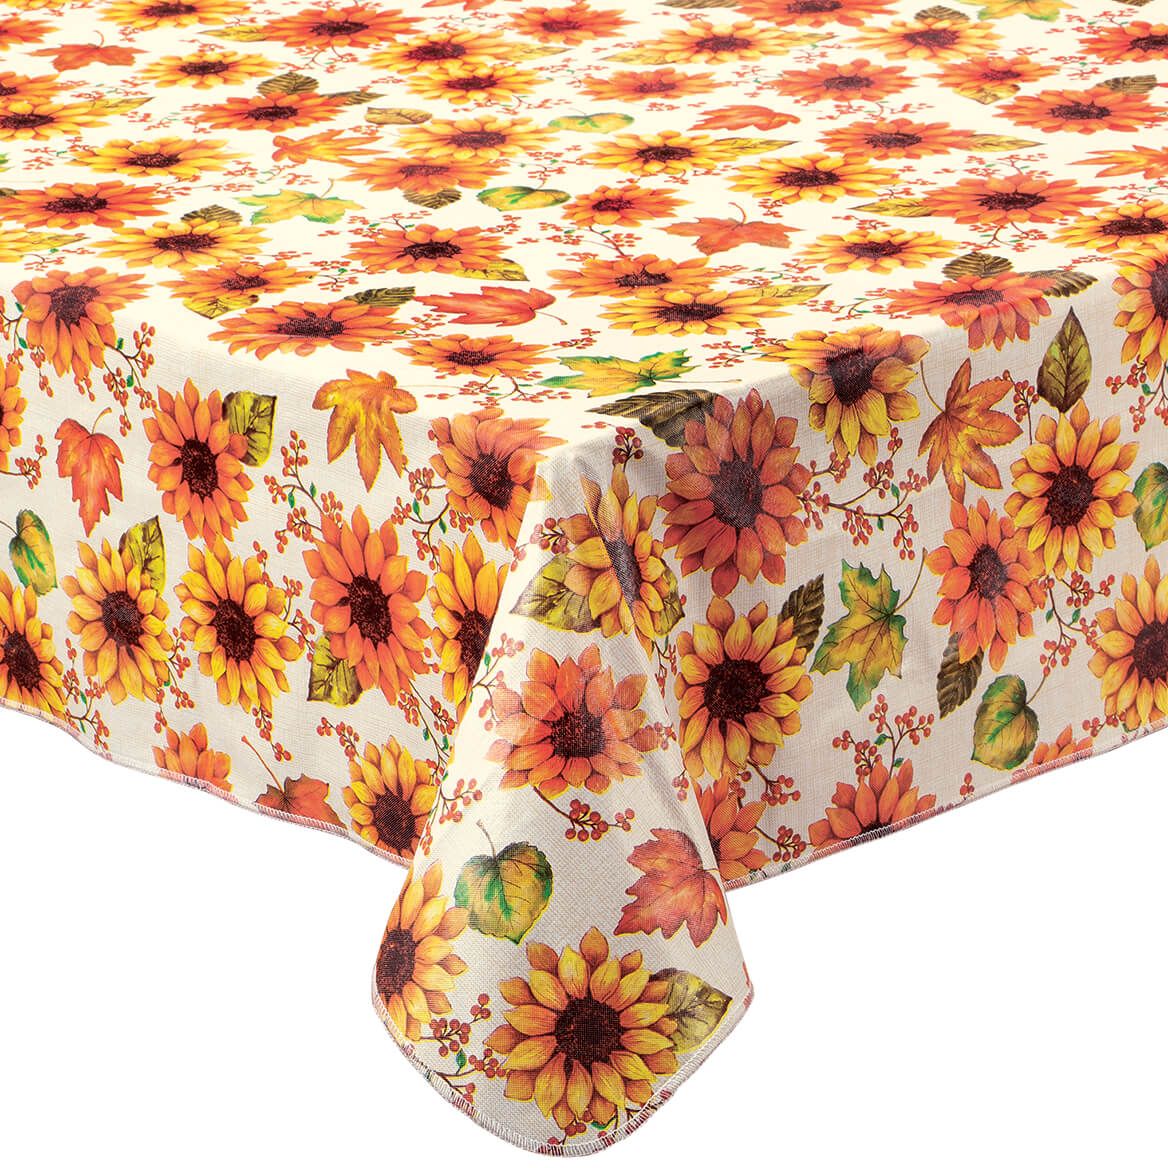 Sunflower Harvest Vinyl Table Cover by Chef's Pride™ + '-' + 373915